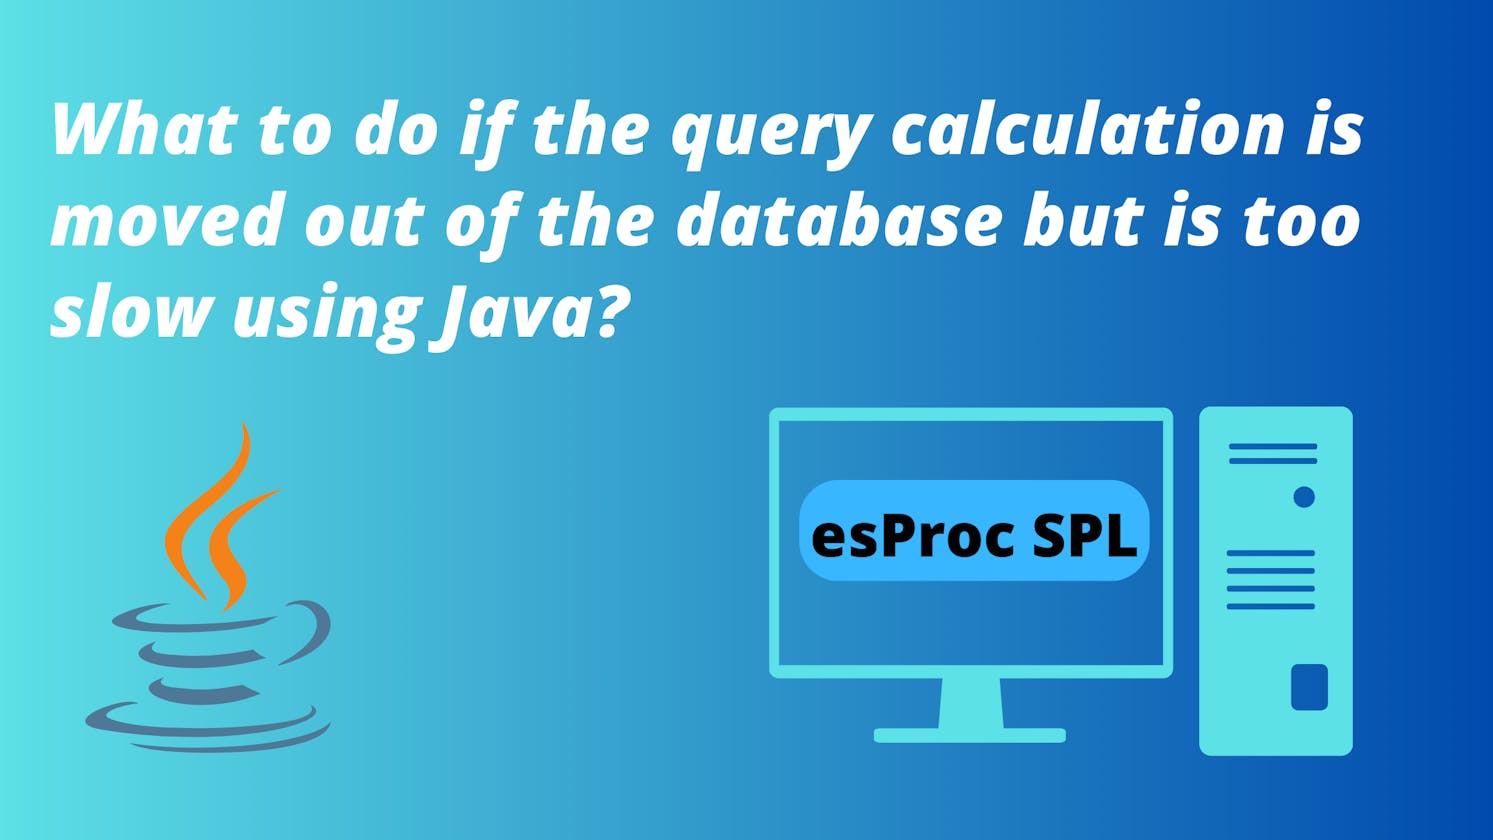 What to do if the query calculation is moved out of the database but is too slow using Java?